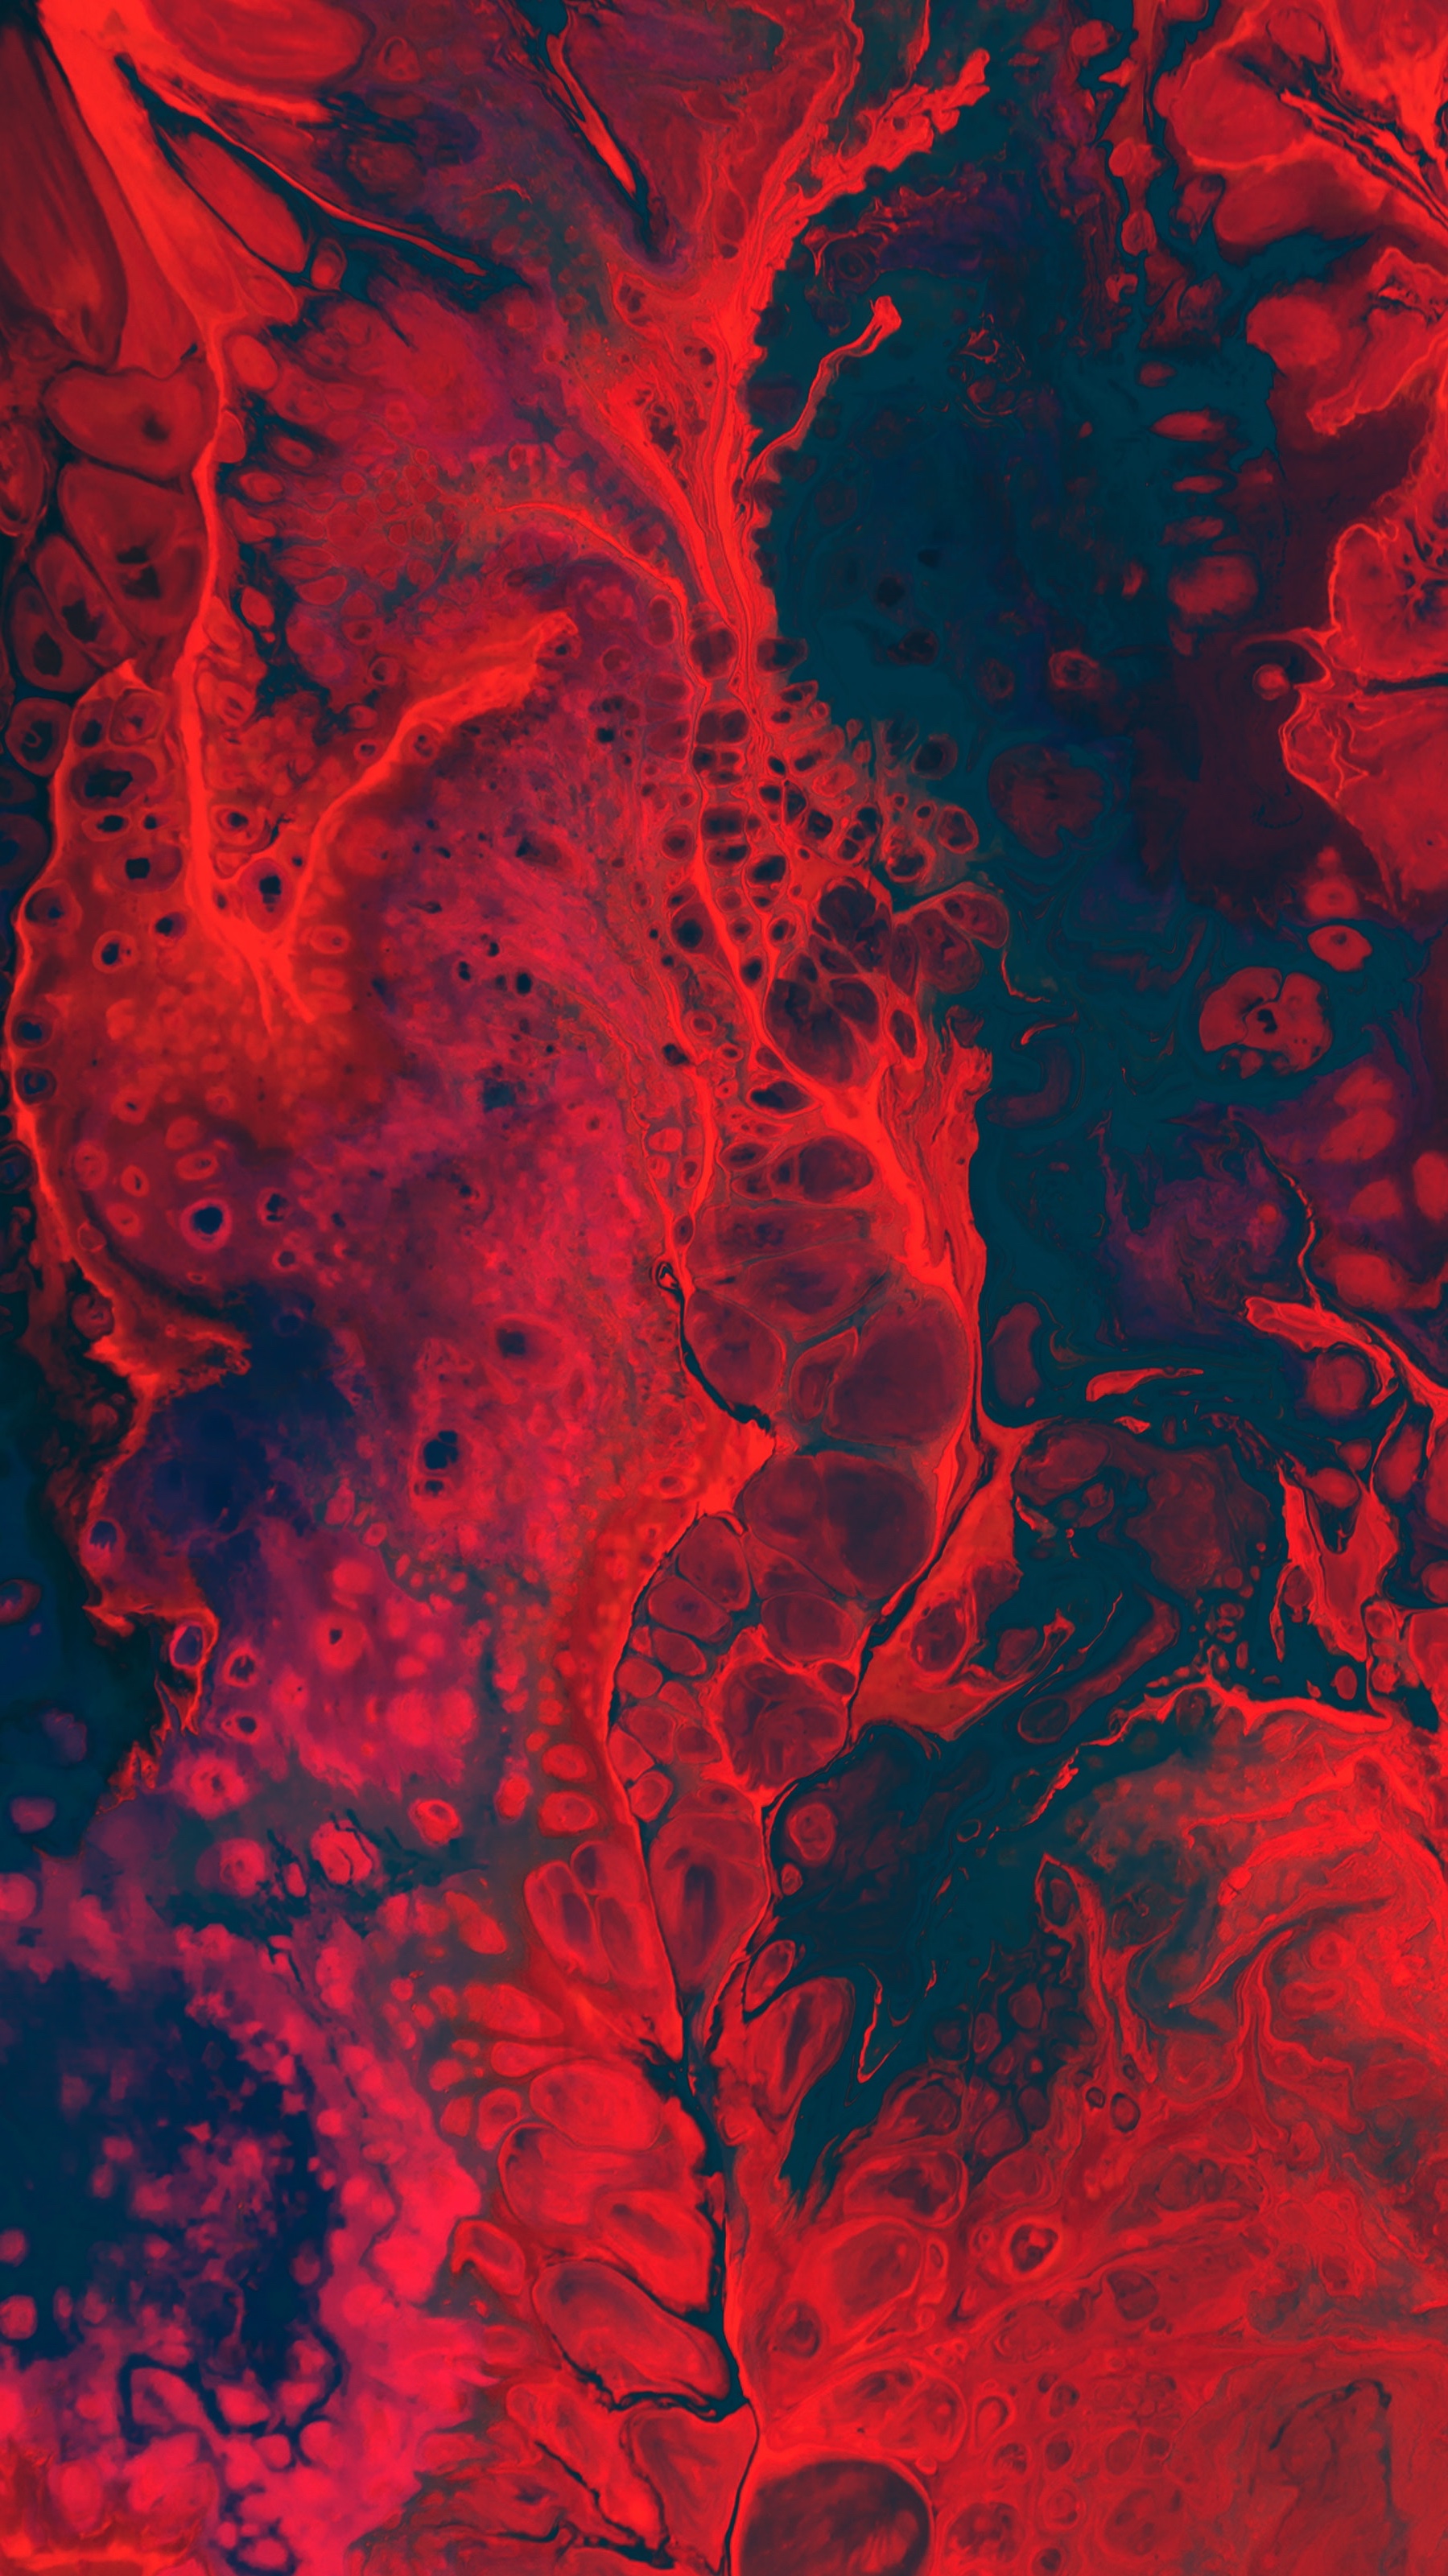 paint, textures, liquid, stains, texture, red, macro, spots lock screen backgrounds